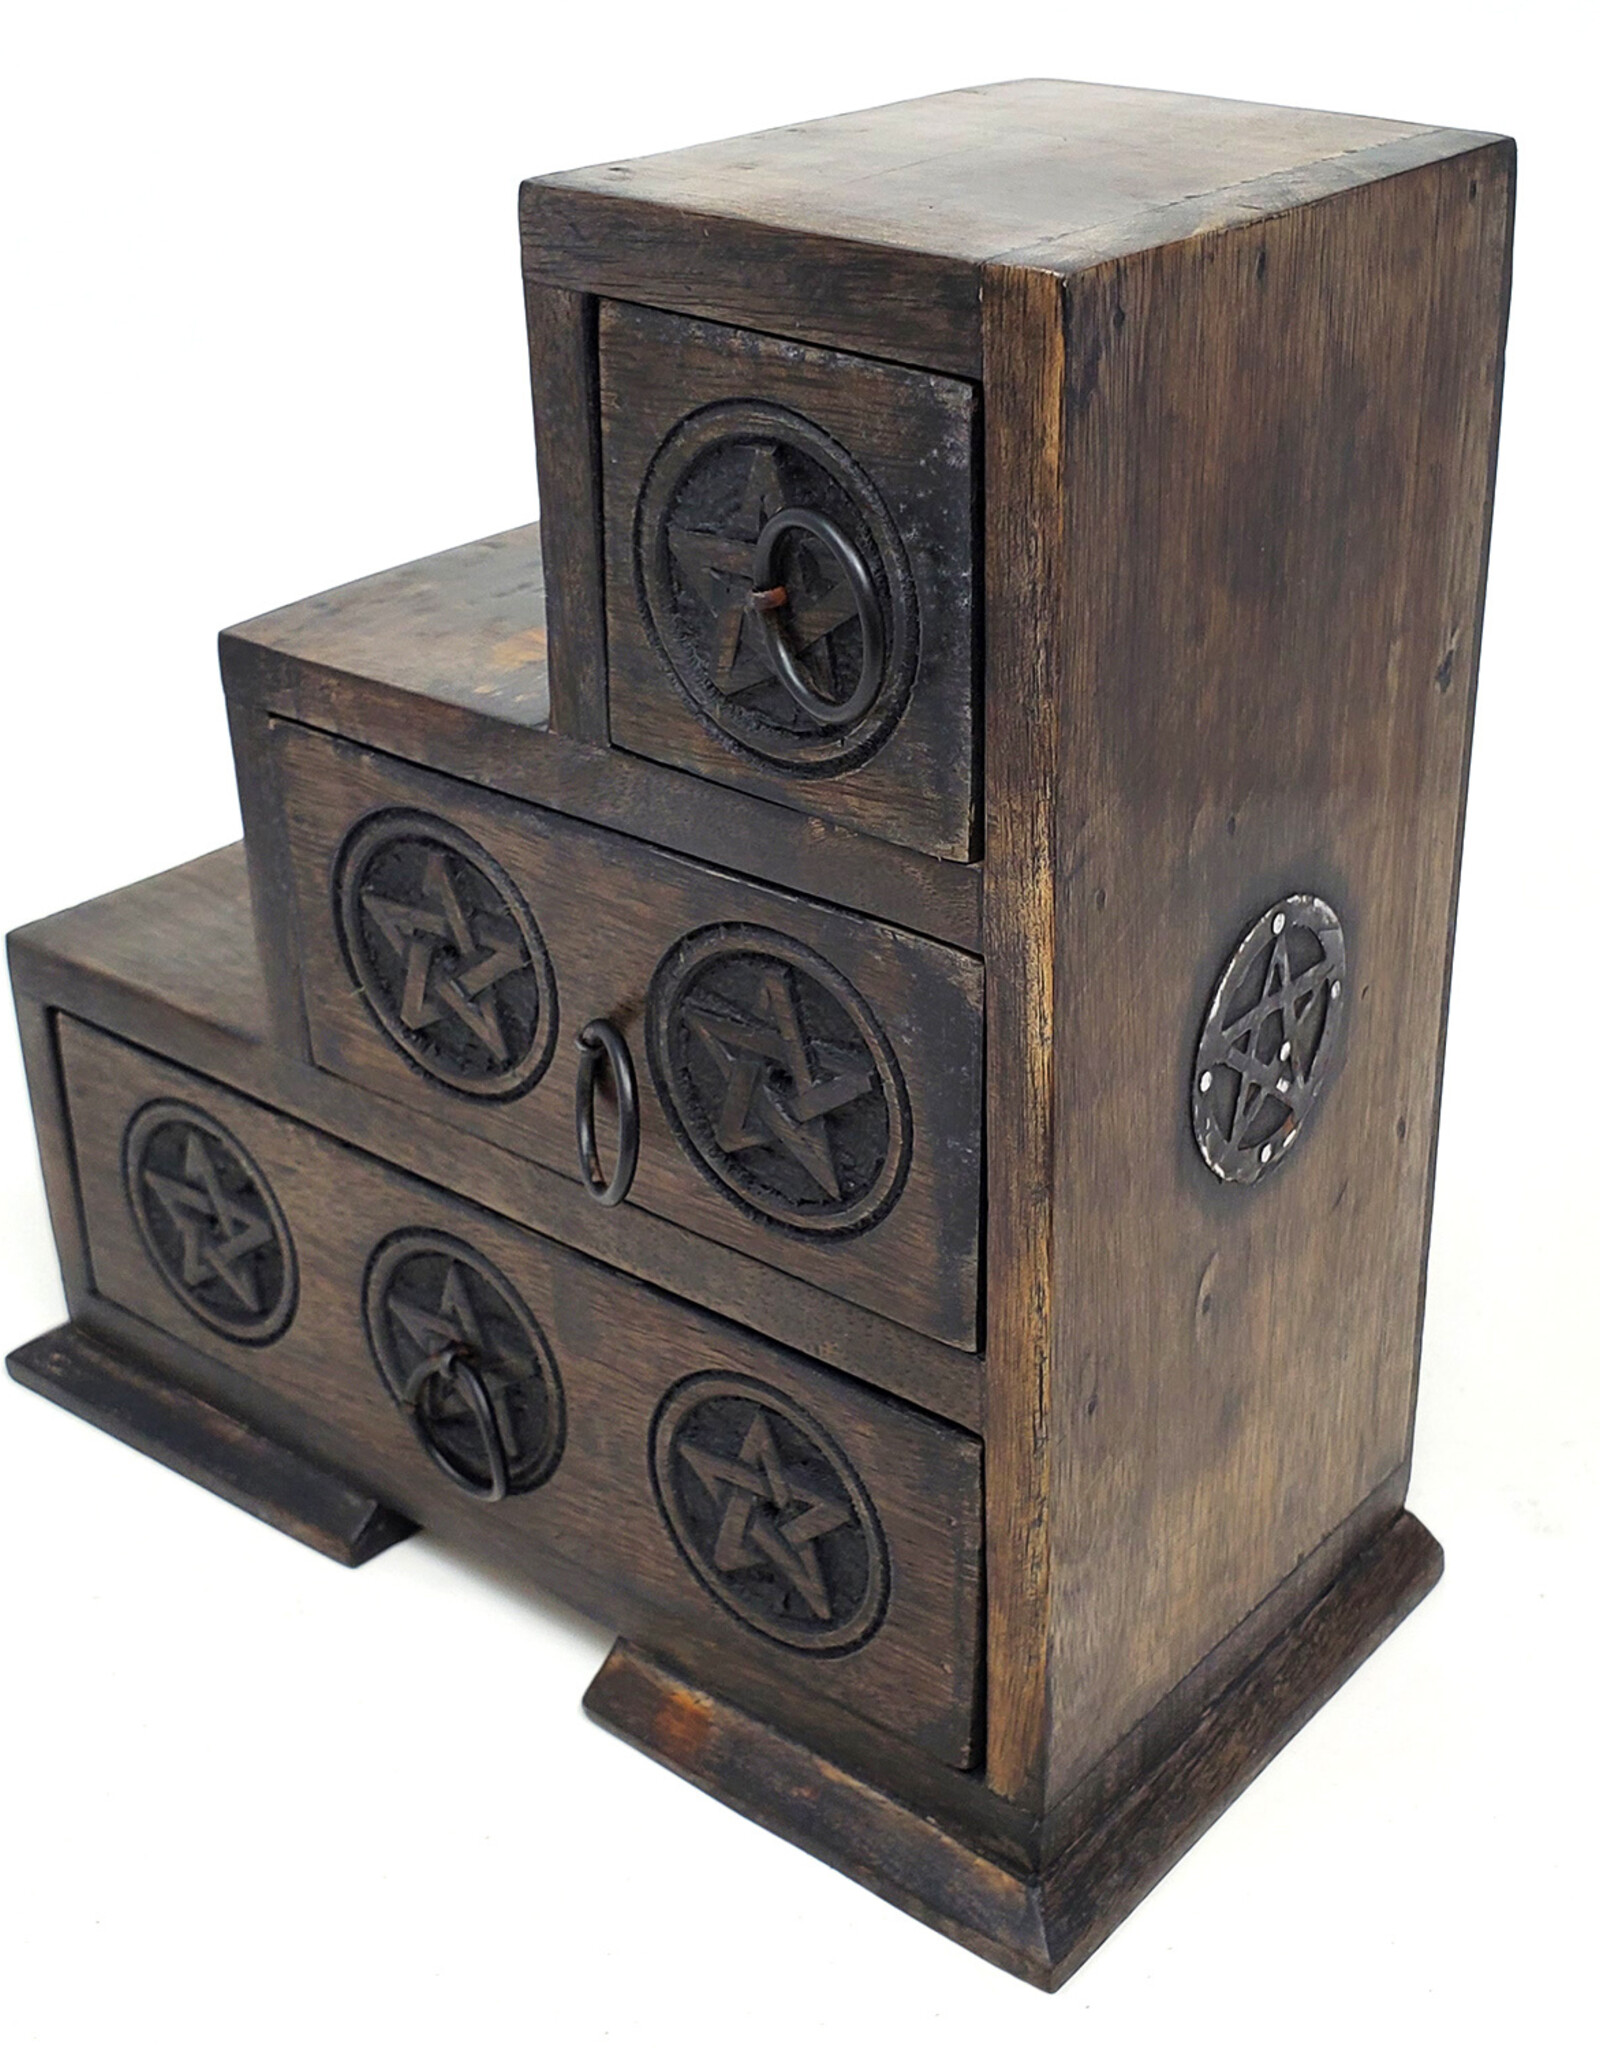 New Age Imports, Inc. Pentagram 3 Step Chest 9x9"